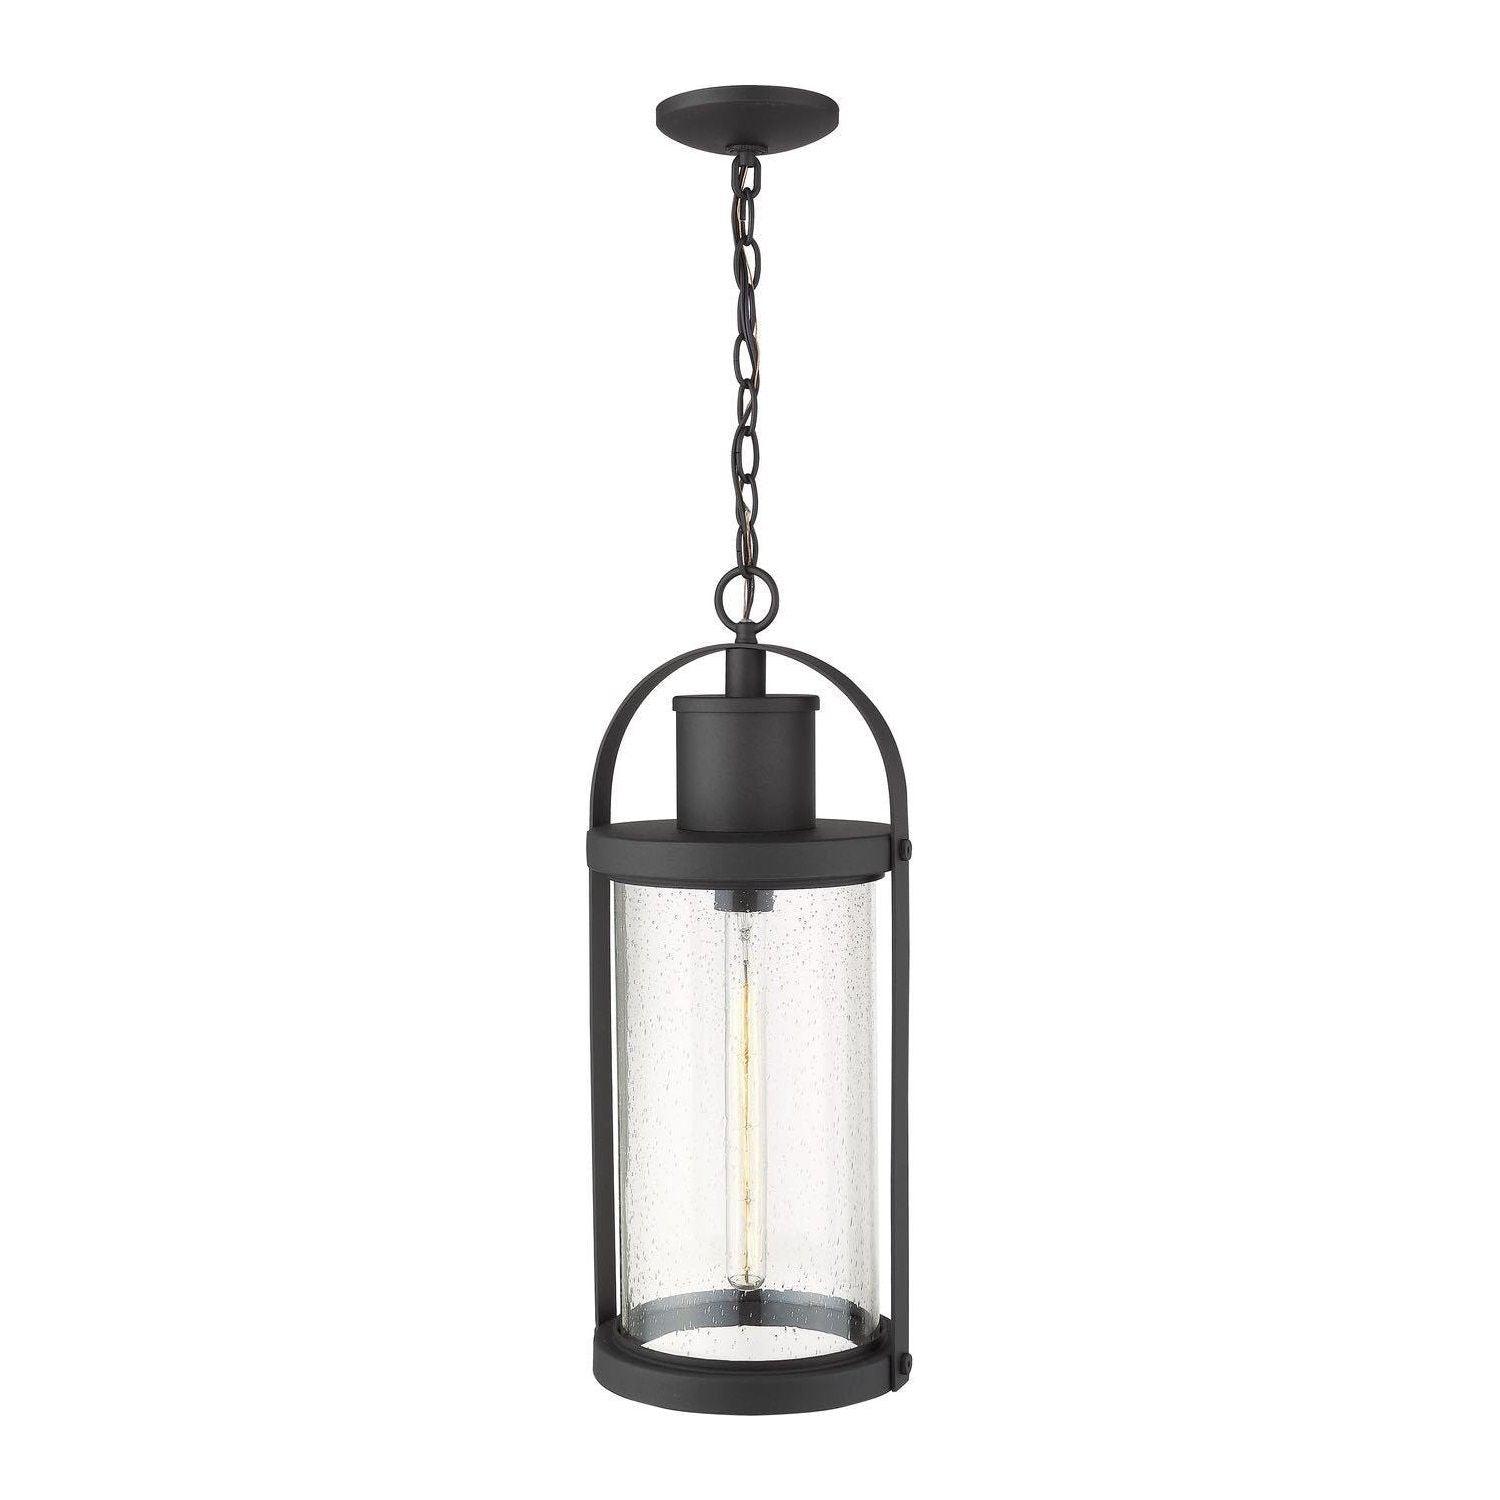 Z-Lite - Roundhouse Outdoor Pendant - Lights Canada